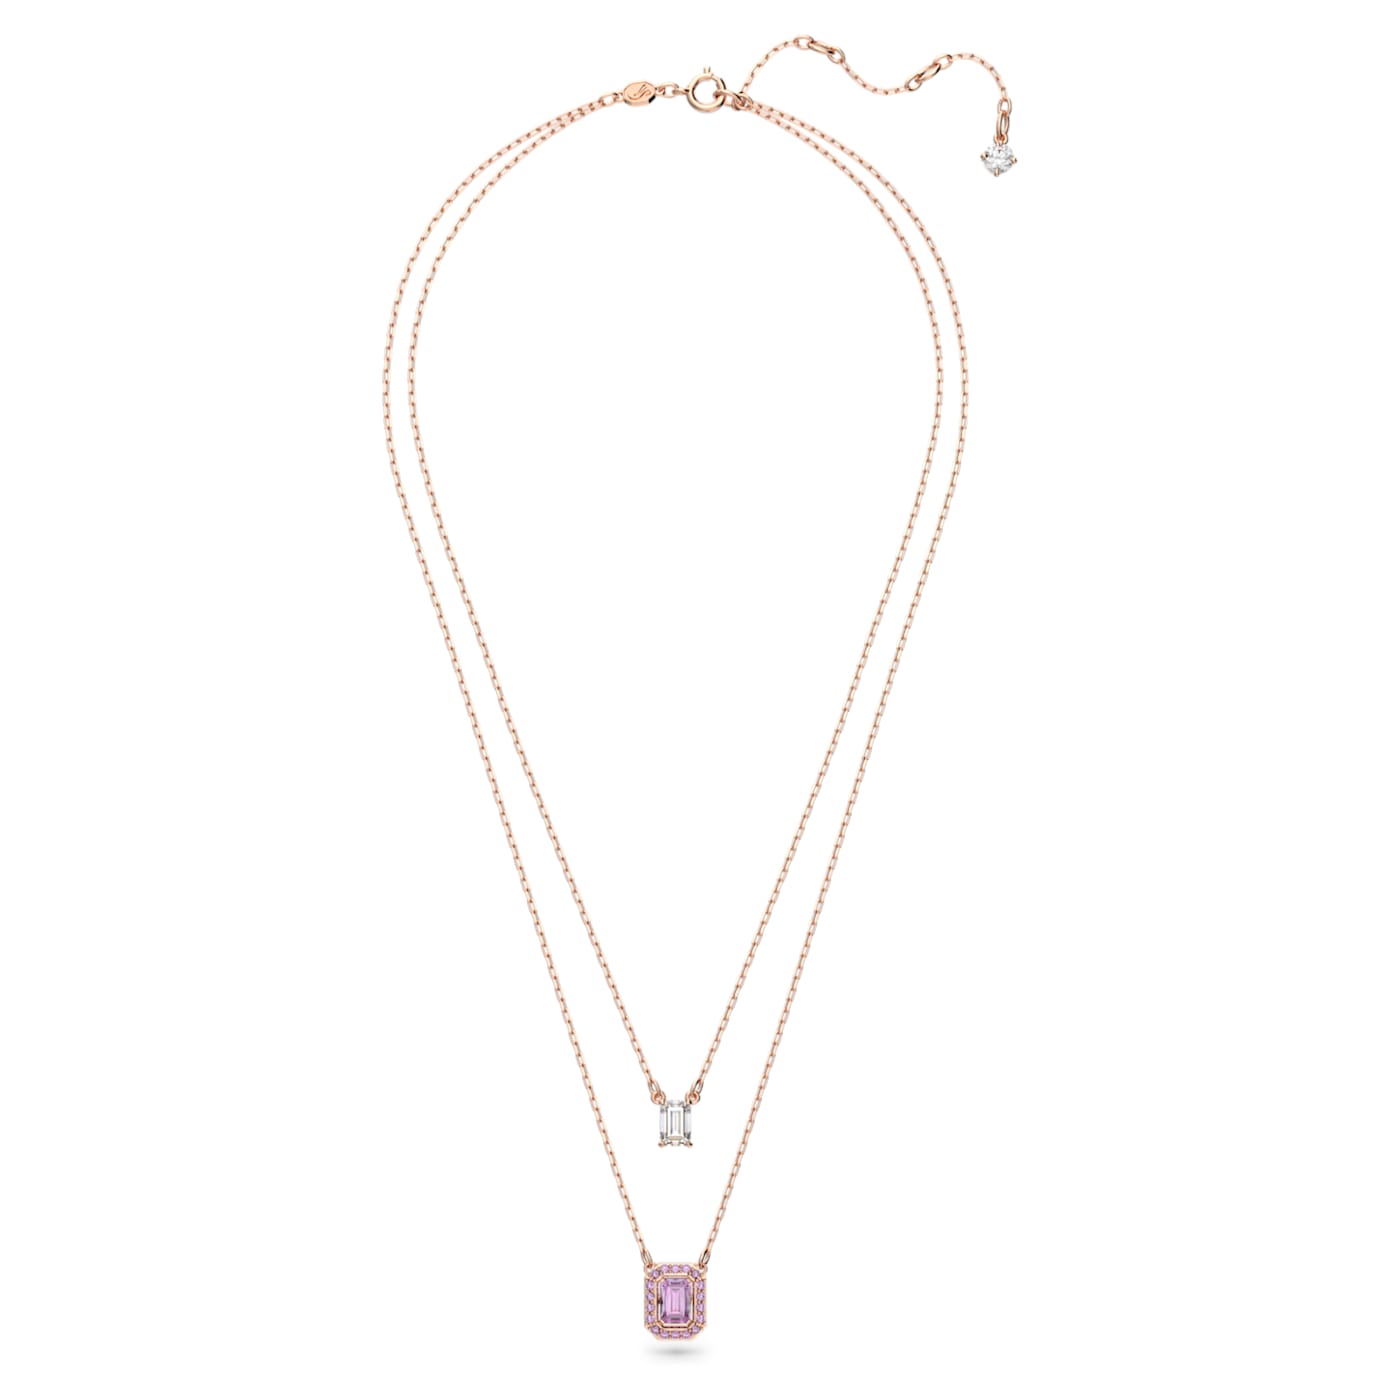 Millenia necklace, Octagon cut, Pink, Rose gold-tone plated